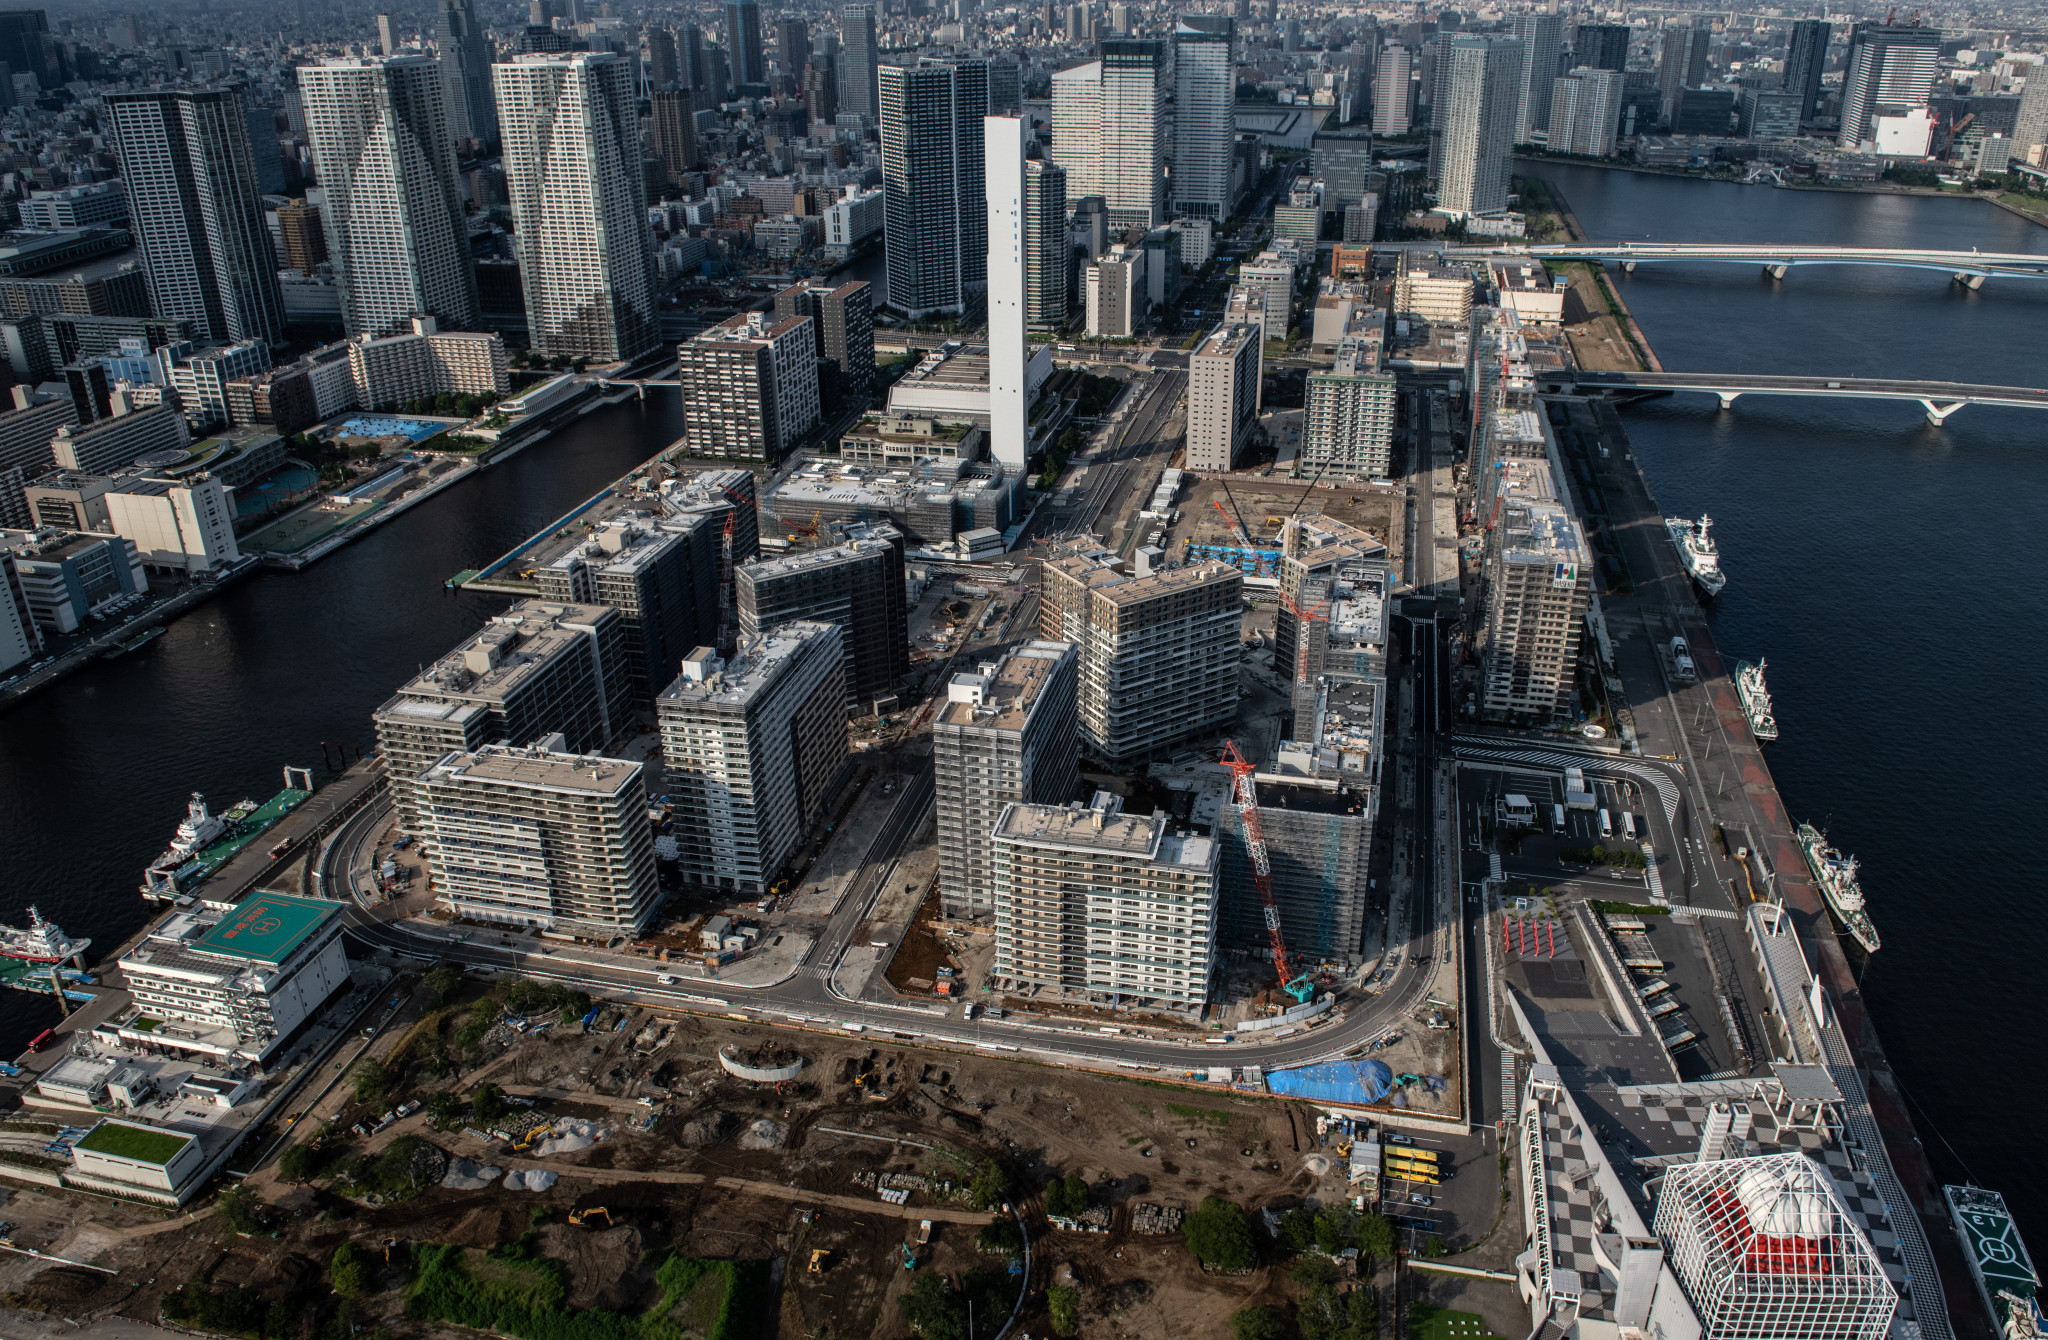 Tokyo 2020 Athletes' Village to welcome first residents after turning into housing